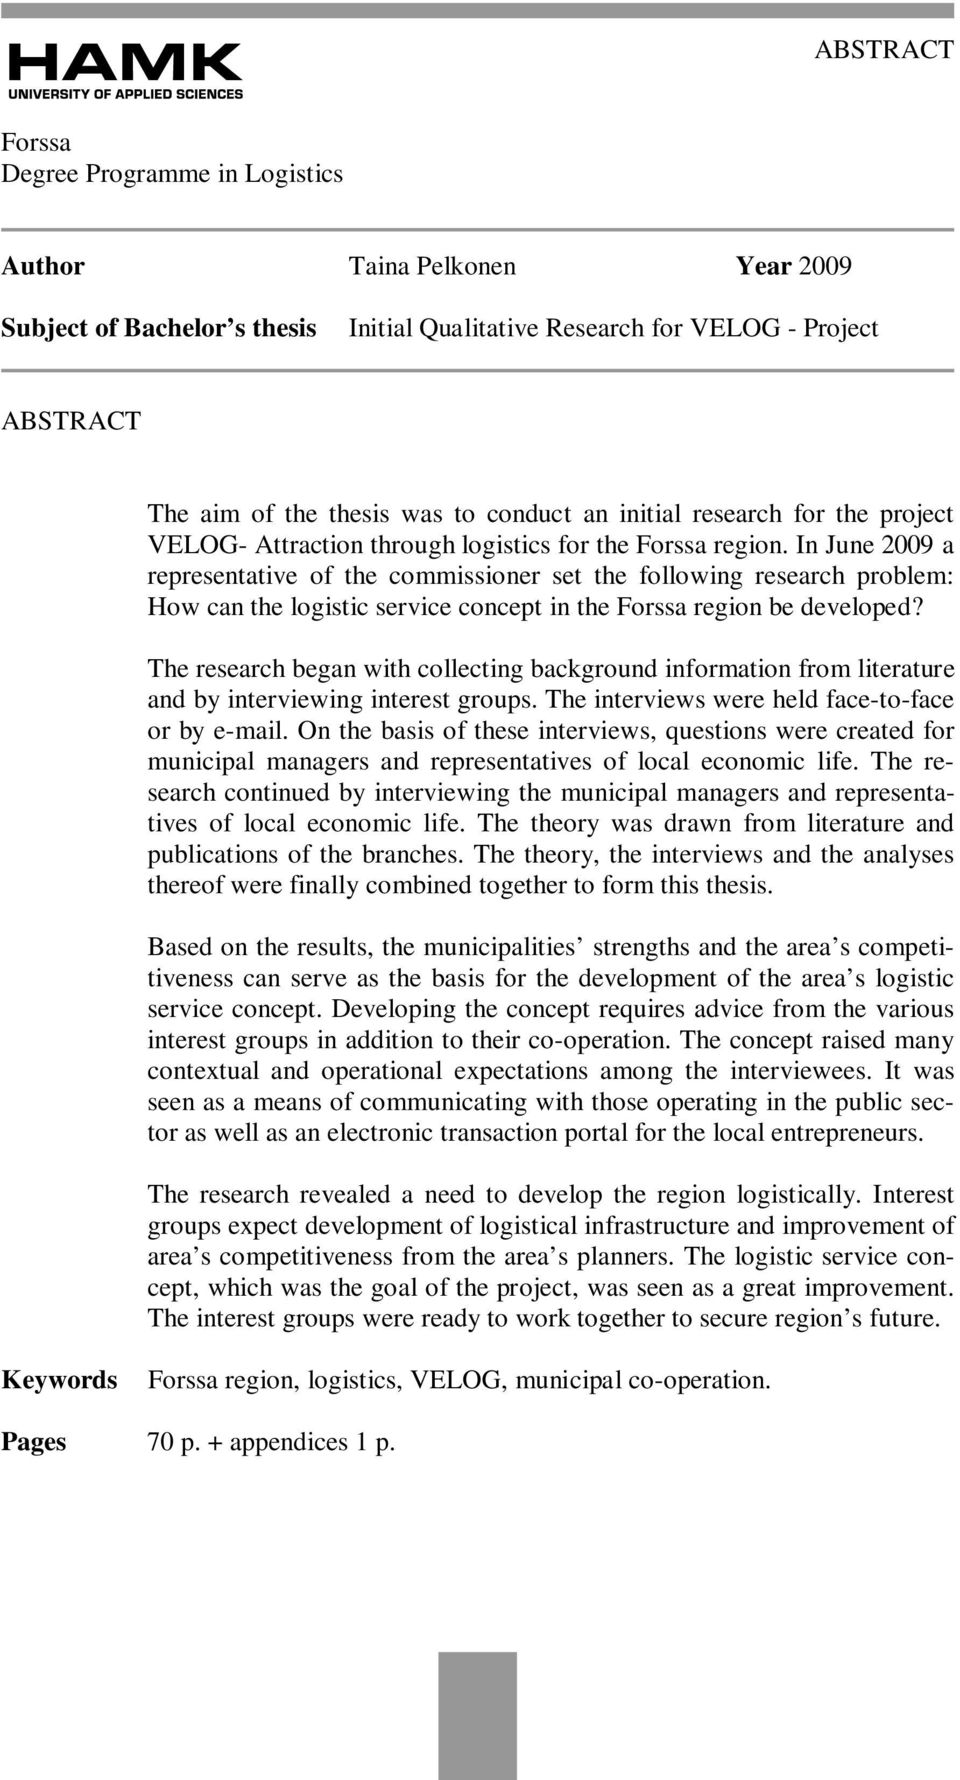 In June 2009 a representative of the commissioner set the following research problem: How can the logistic service concept in the Forssa region be developed?